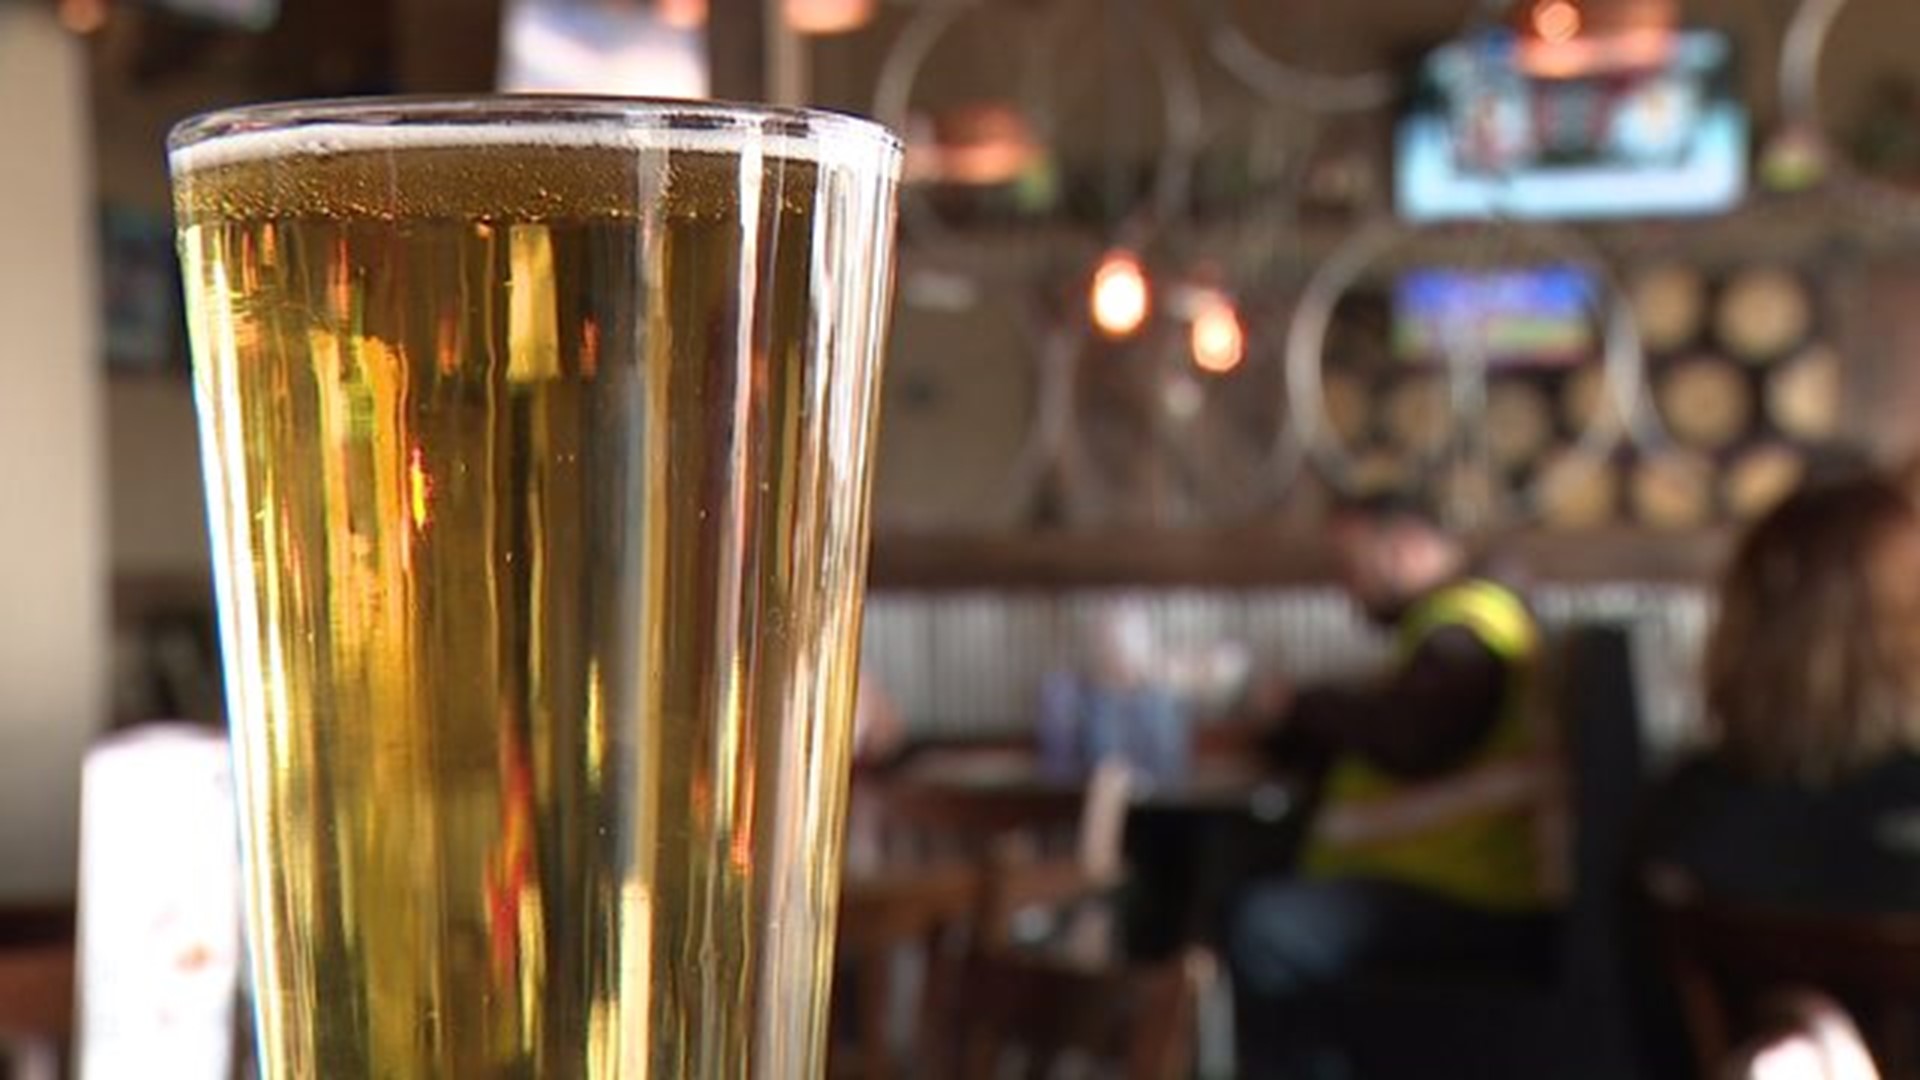 New bill proposal would allow 18 year olds to drink